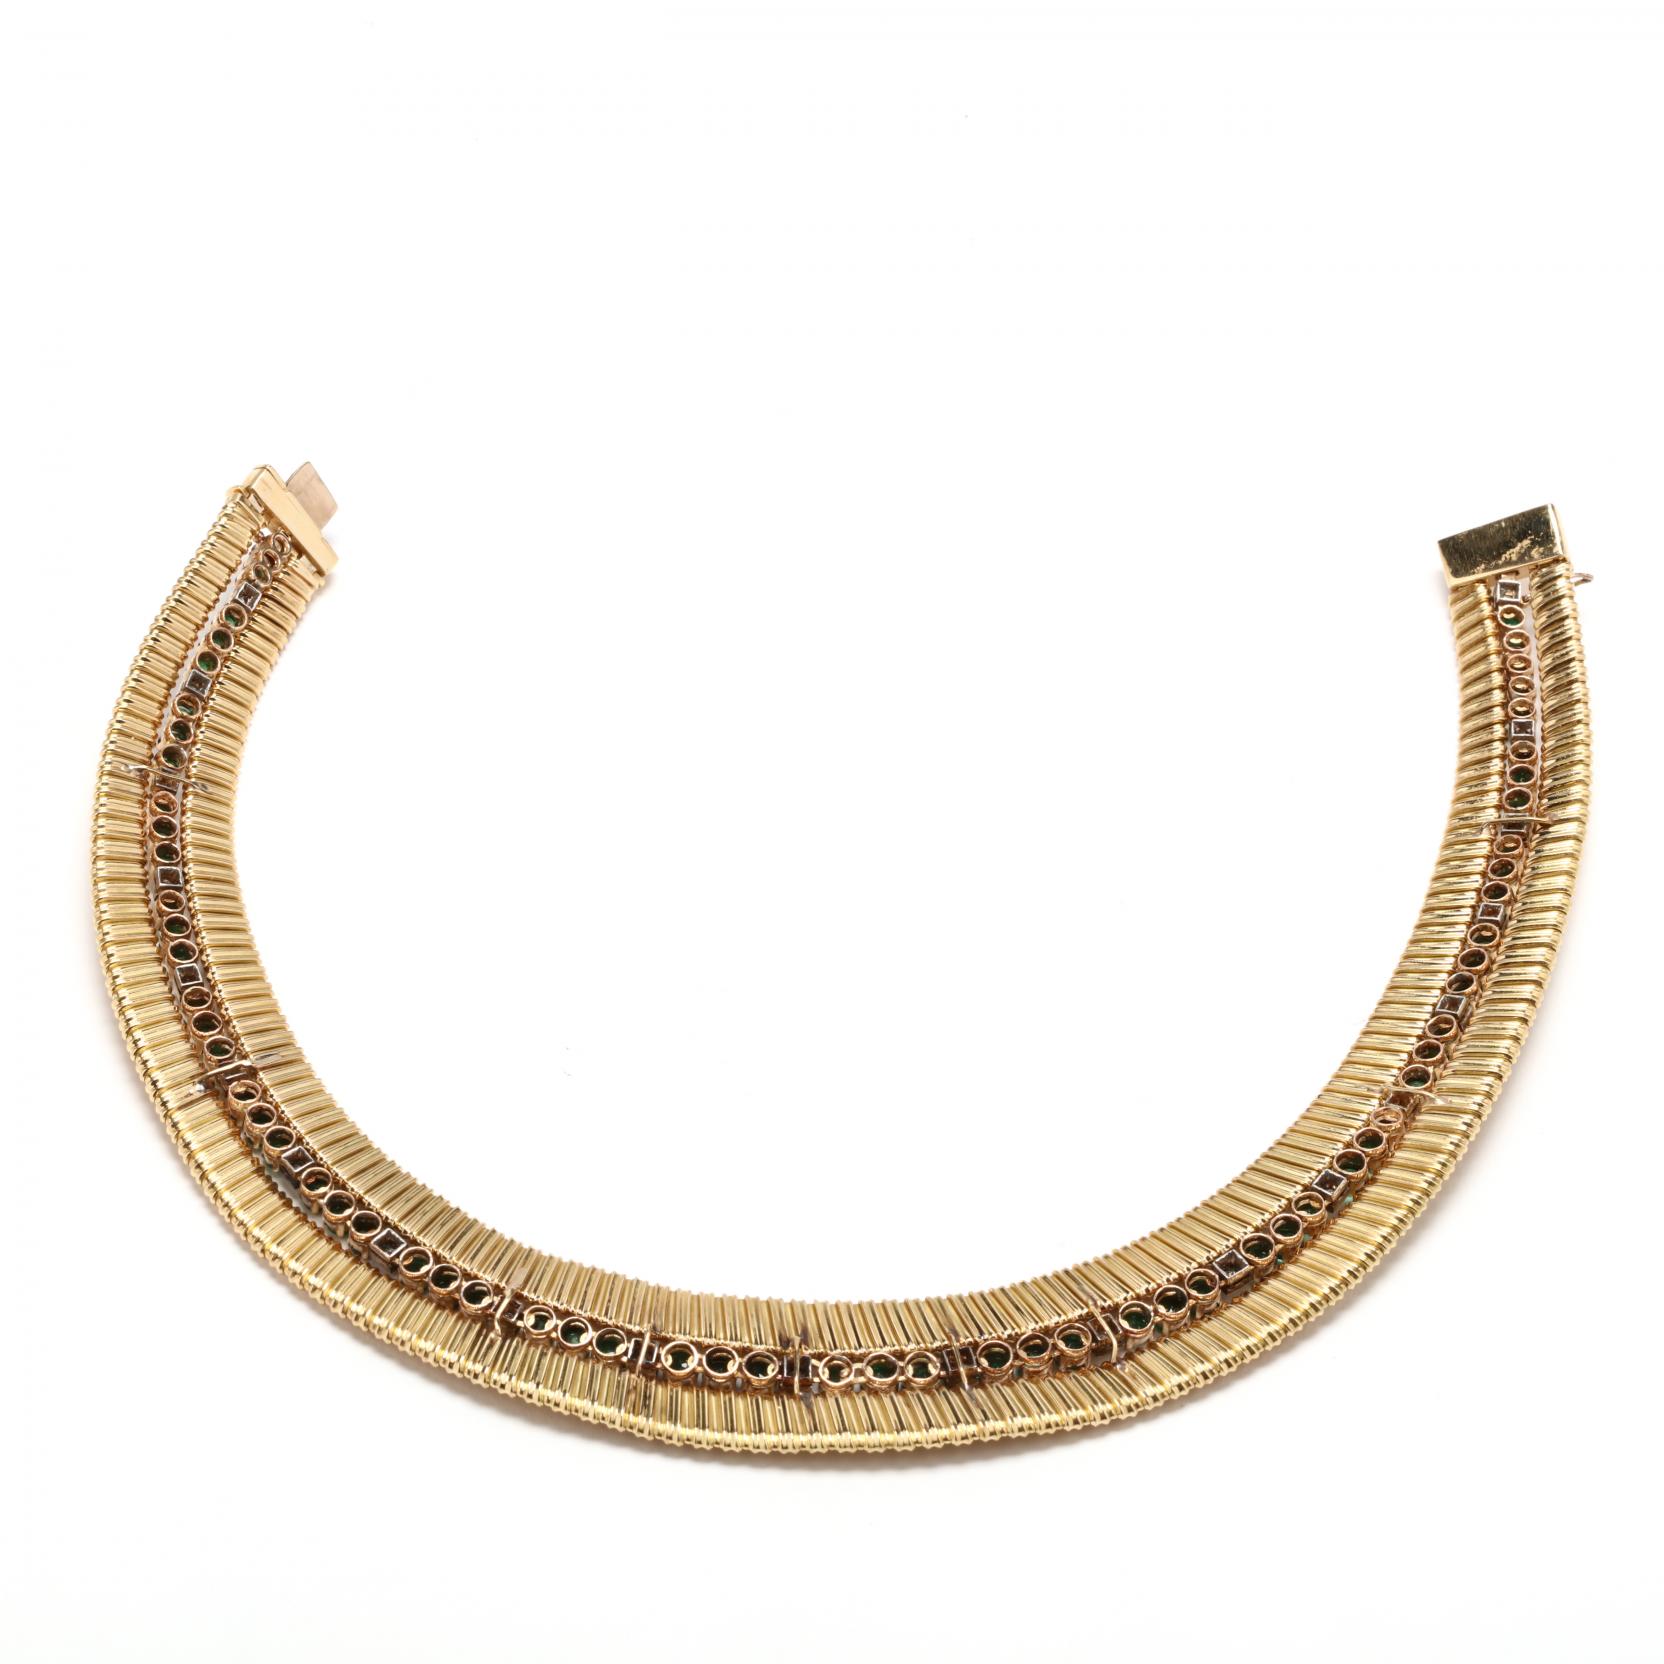 18KT Gold, Emerald, and Diamond Choker Necklace - Image 3 of 3